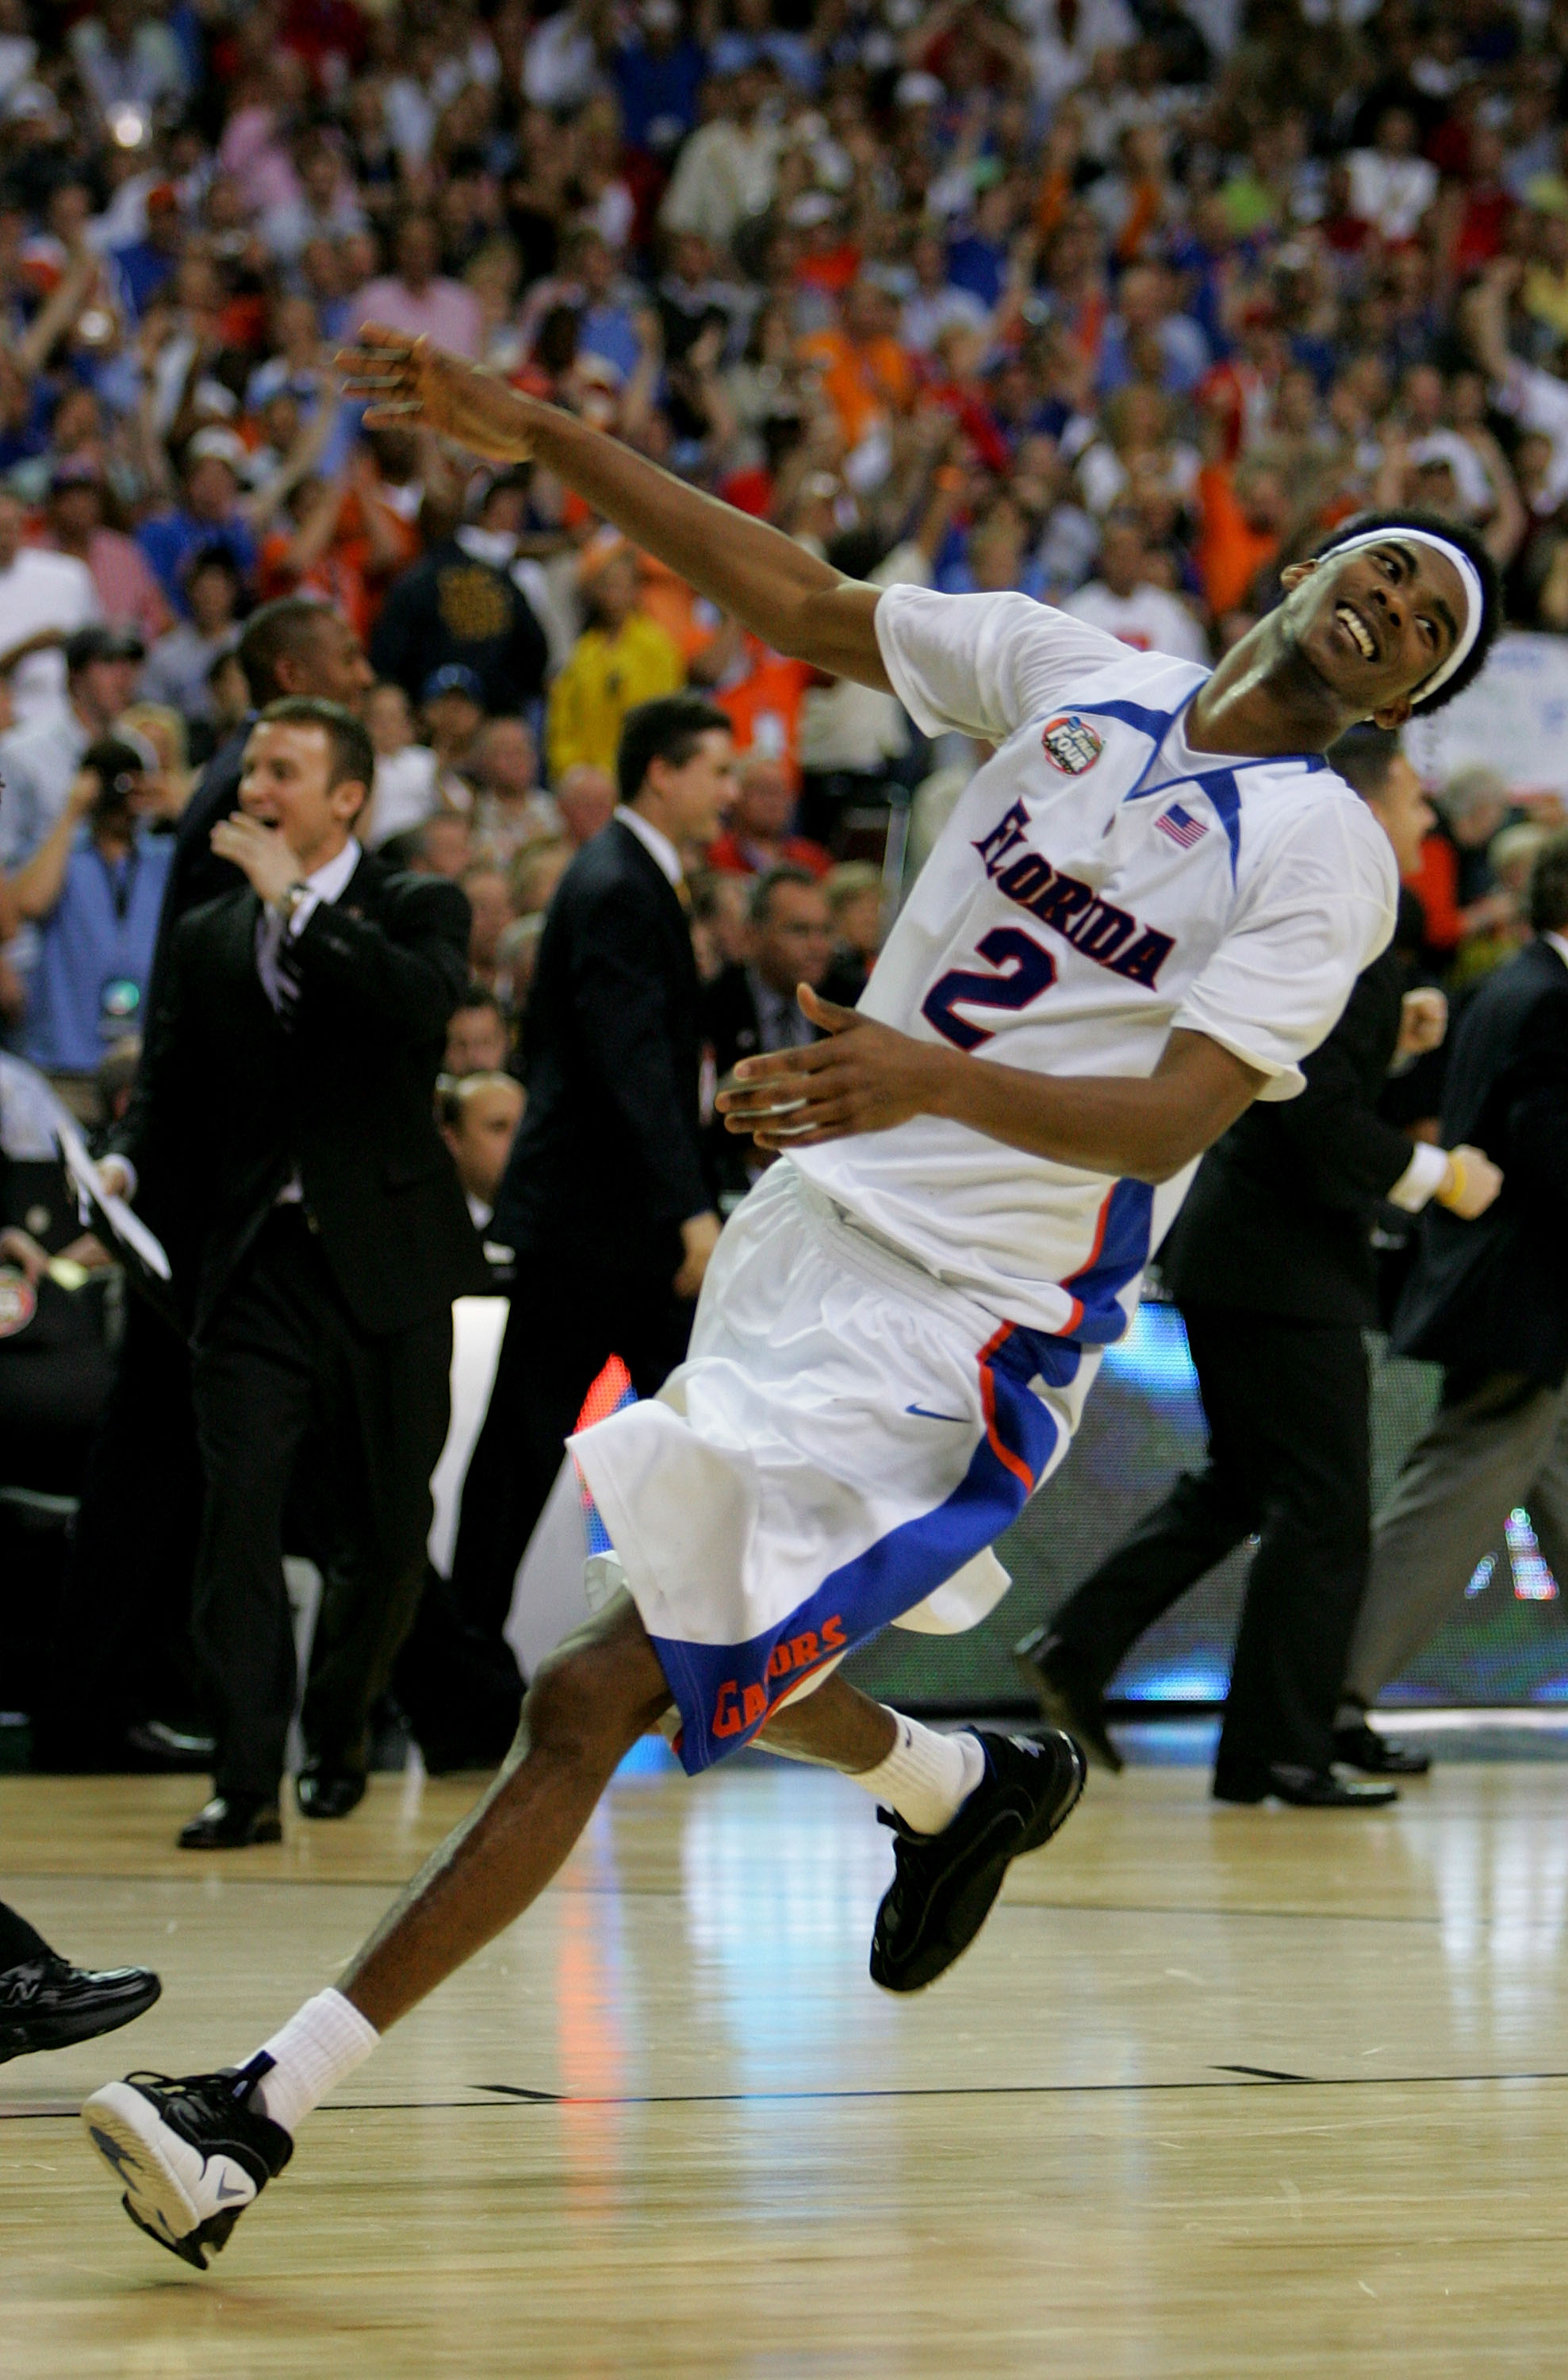 ATLANTA - APRIL 02:  Corey Brewer #2 of the Florida Gators celebrates after defeating the Ohio State Buckeyes during the NCAA Men's Basketball Championship game at the Georgia Dome on April 2, 2007 in Atlanta, Georgia.  (Photo by Andy Lyons/Getty Images)